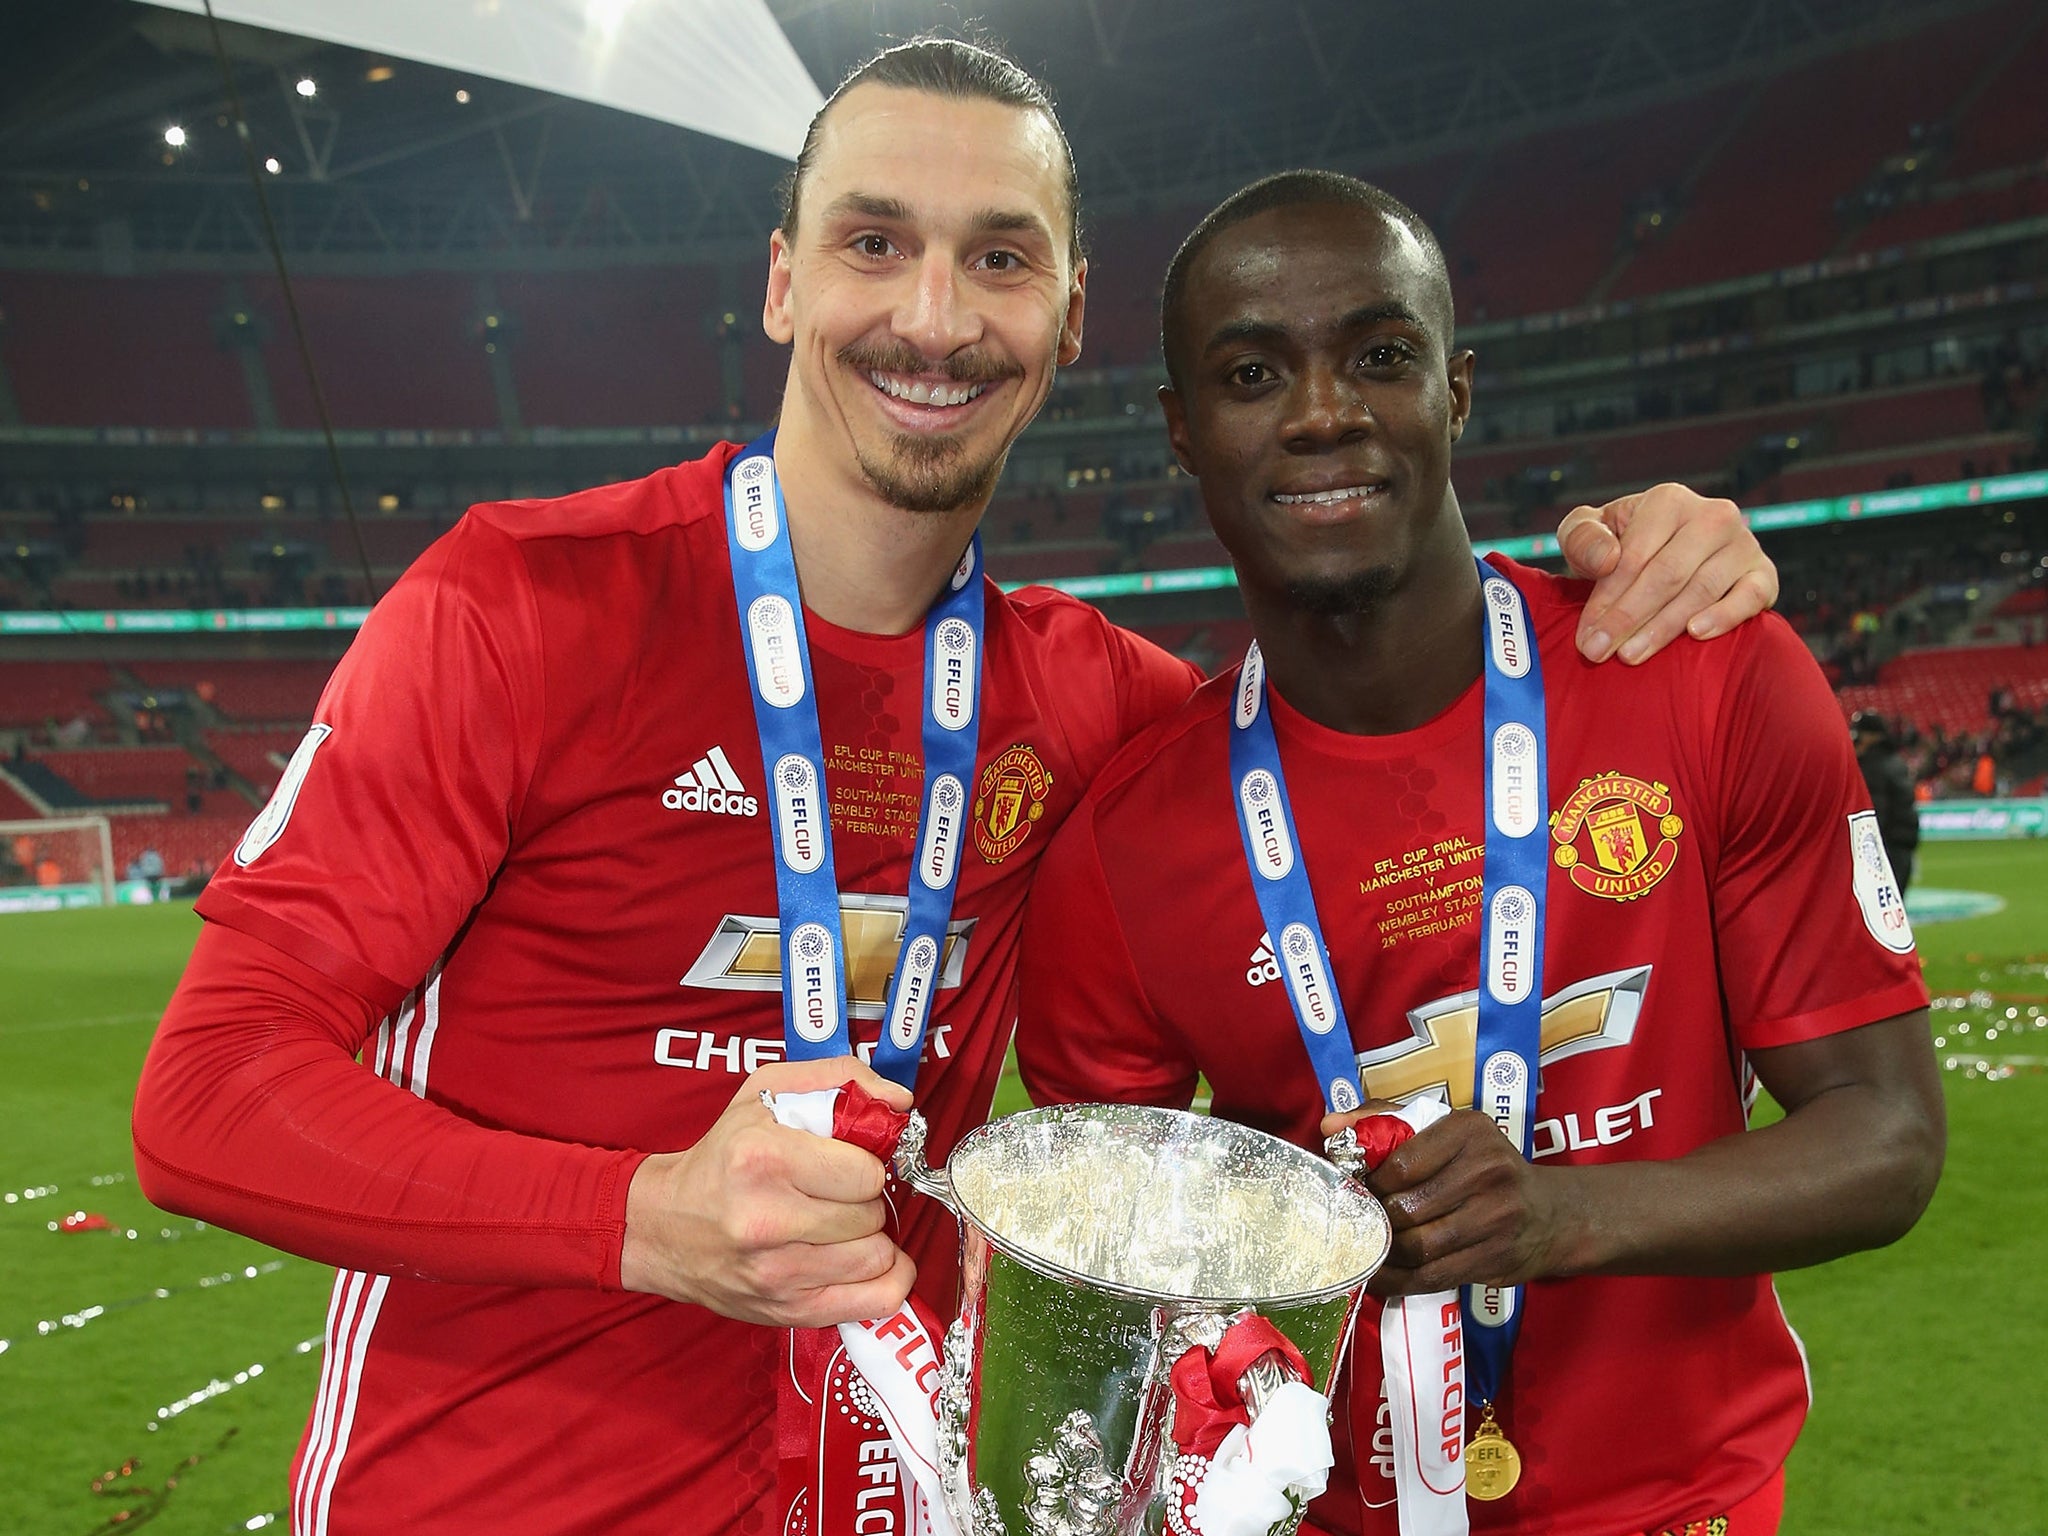 Zlatan Ibrahimovic Instagram farewell trolled by Manchester United teammate Eric Bailly in foul-mouthed response